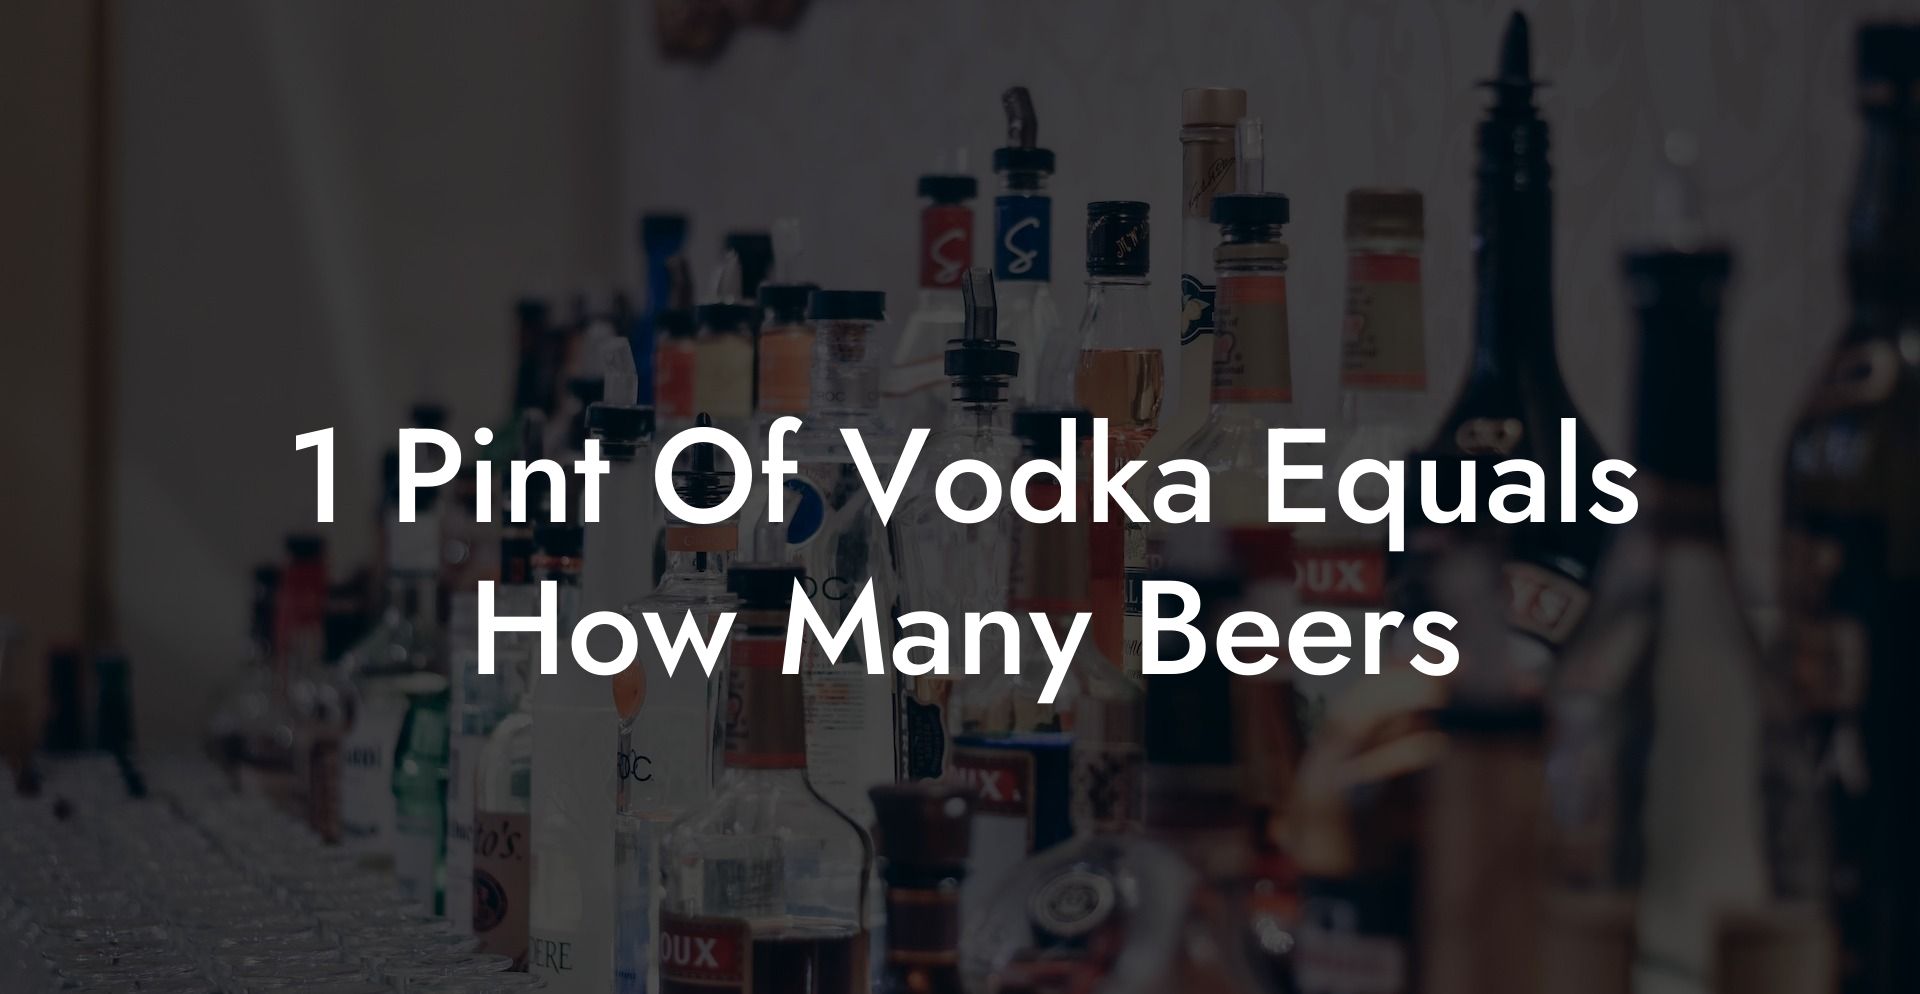 1 Pint Of Vodka Equals How Many Beers